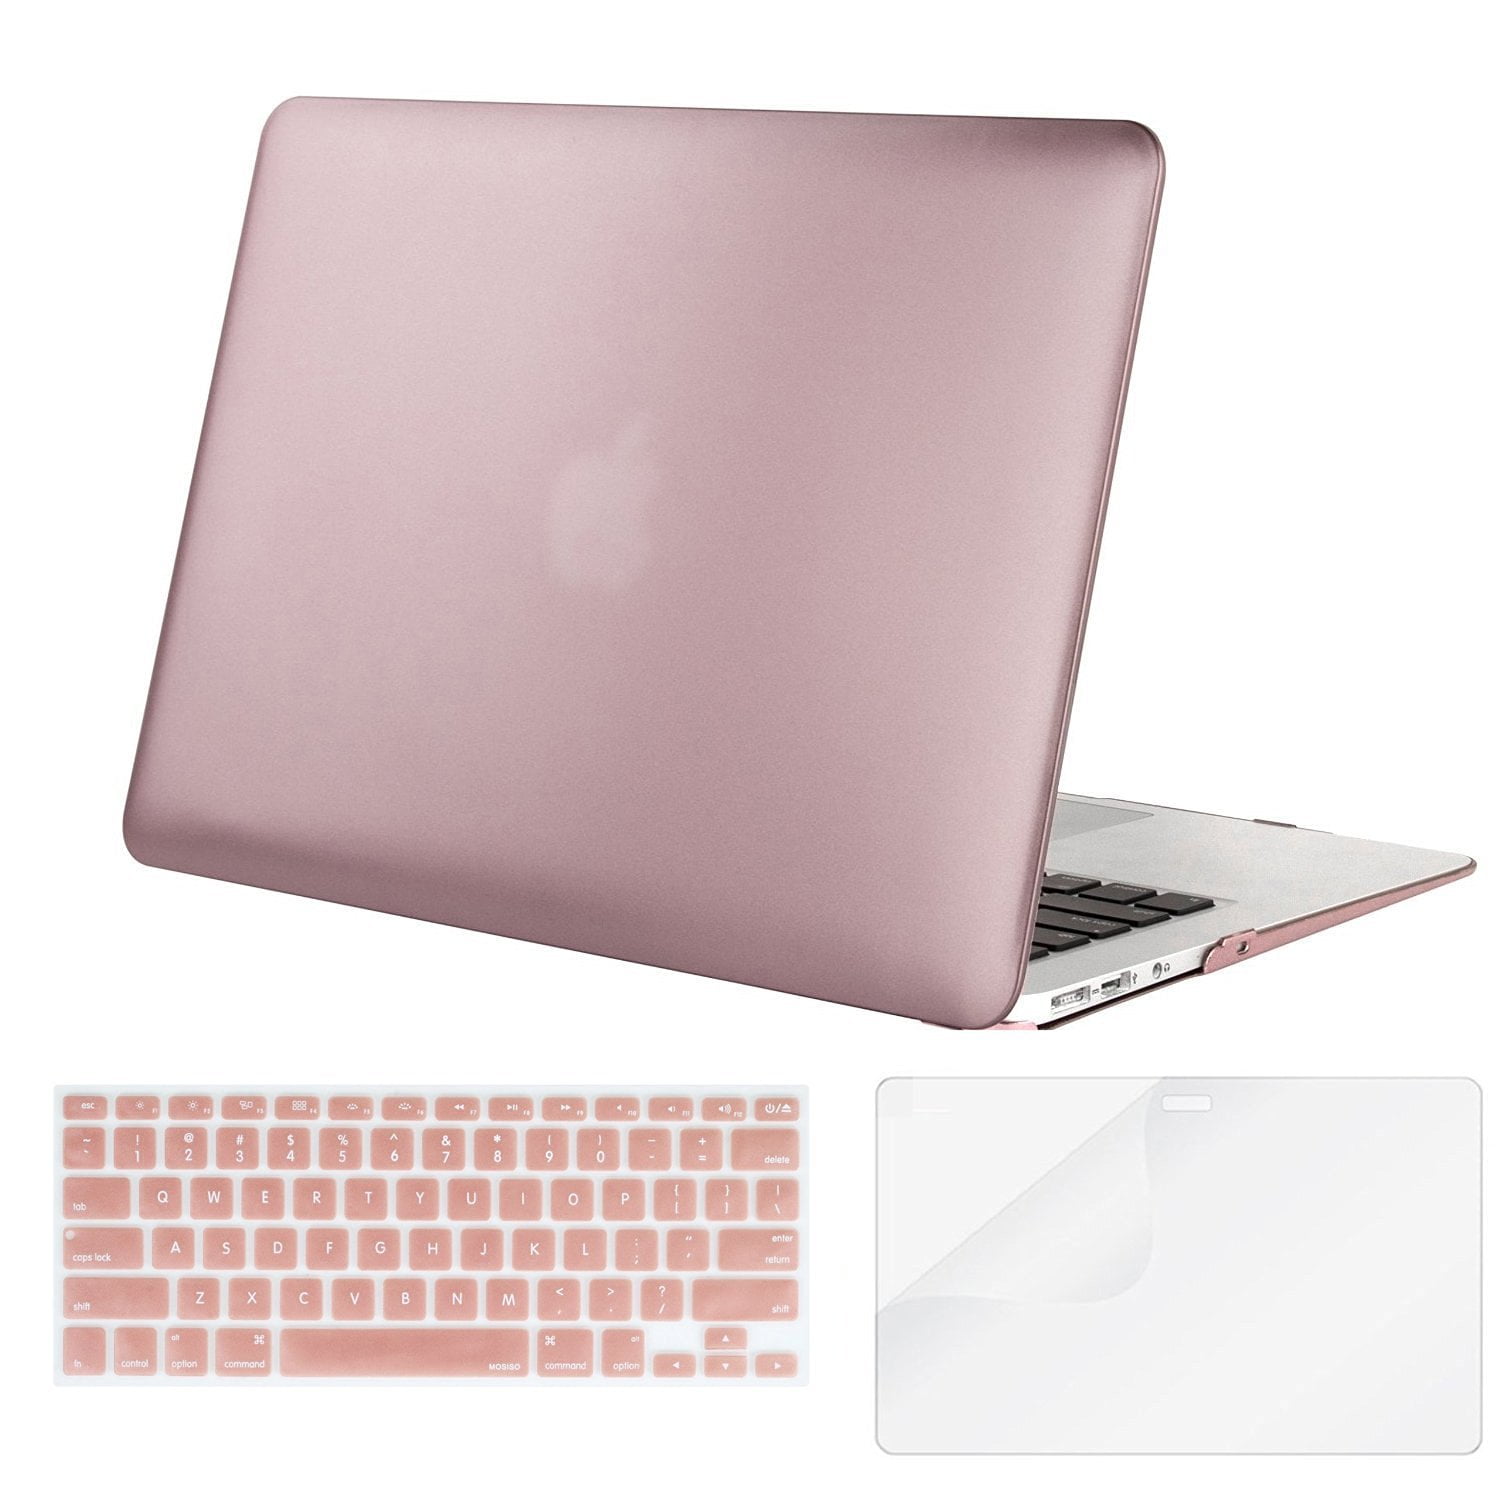 NEW ARRIVALS Crystal TIFANY BLUE Hard Case Cover for Macbook Air 11" A1370 